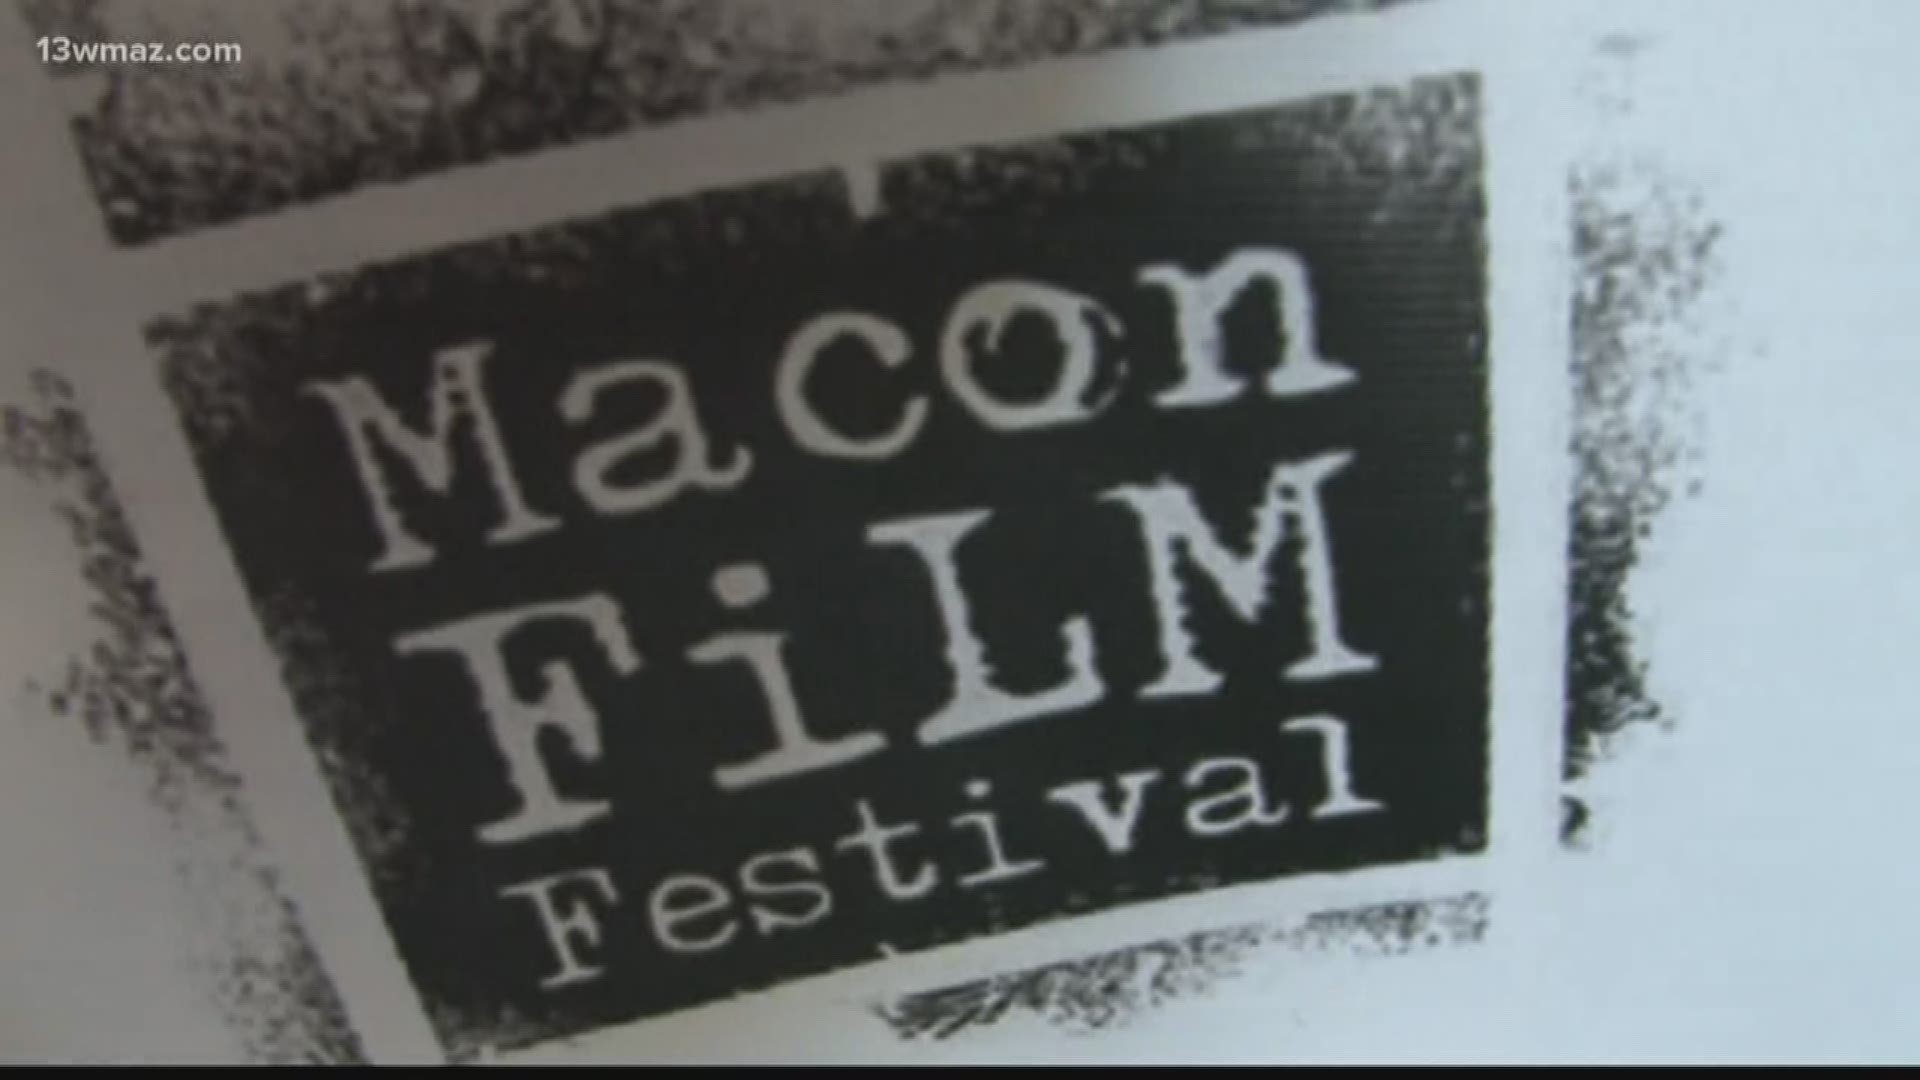 The Macon Film Festival begins Thursday night in downtown Macon. You will see budding directors show off their flicks in places like the Museum of Arts and Sciences. Hollywood has made its impact on Macon, Georgia and on the film festival.